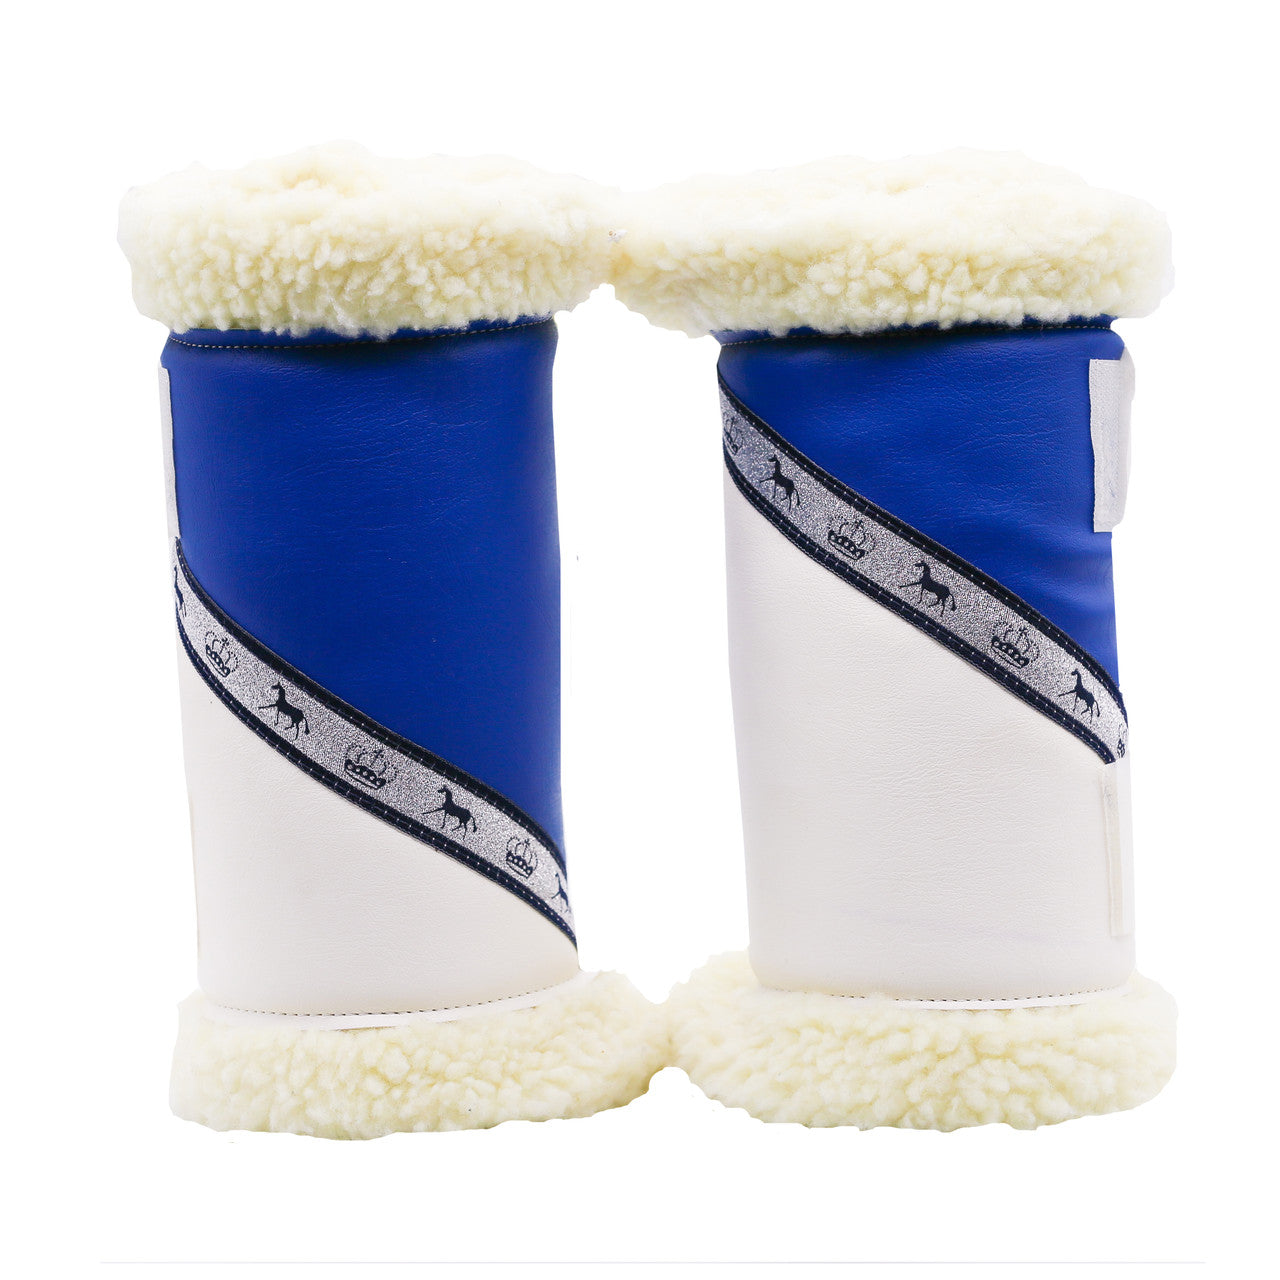 Sherpa Boots - Royal Blue & White (Pair) made to order